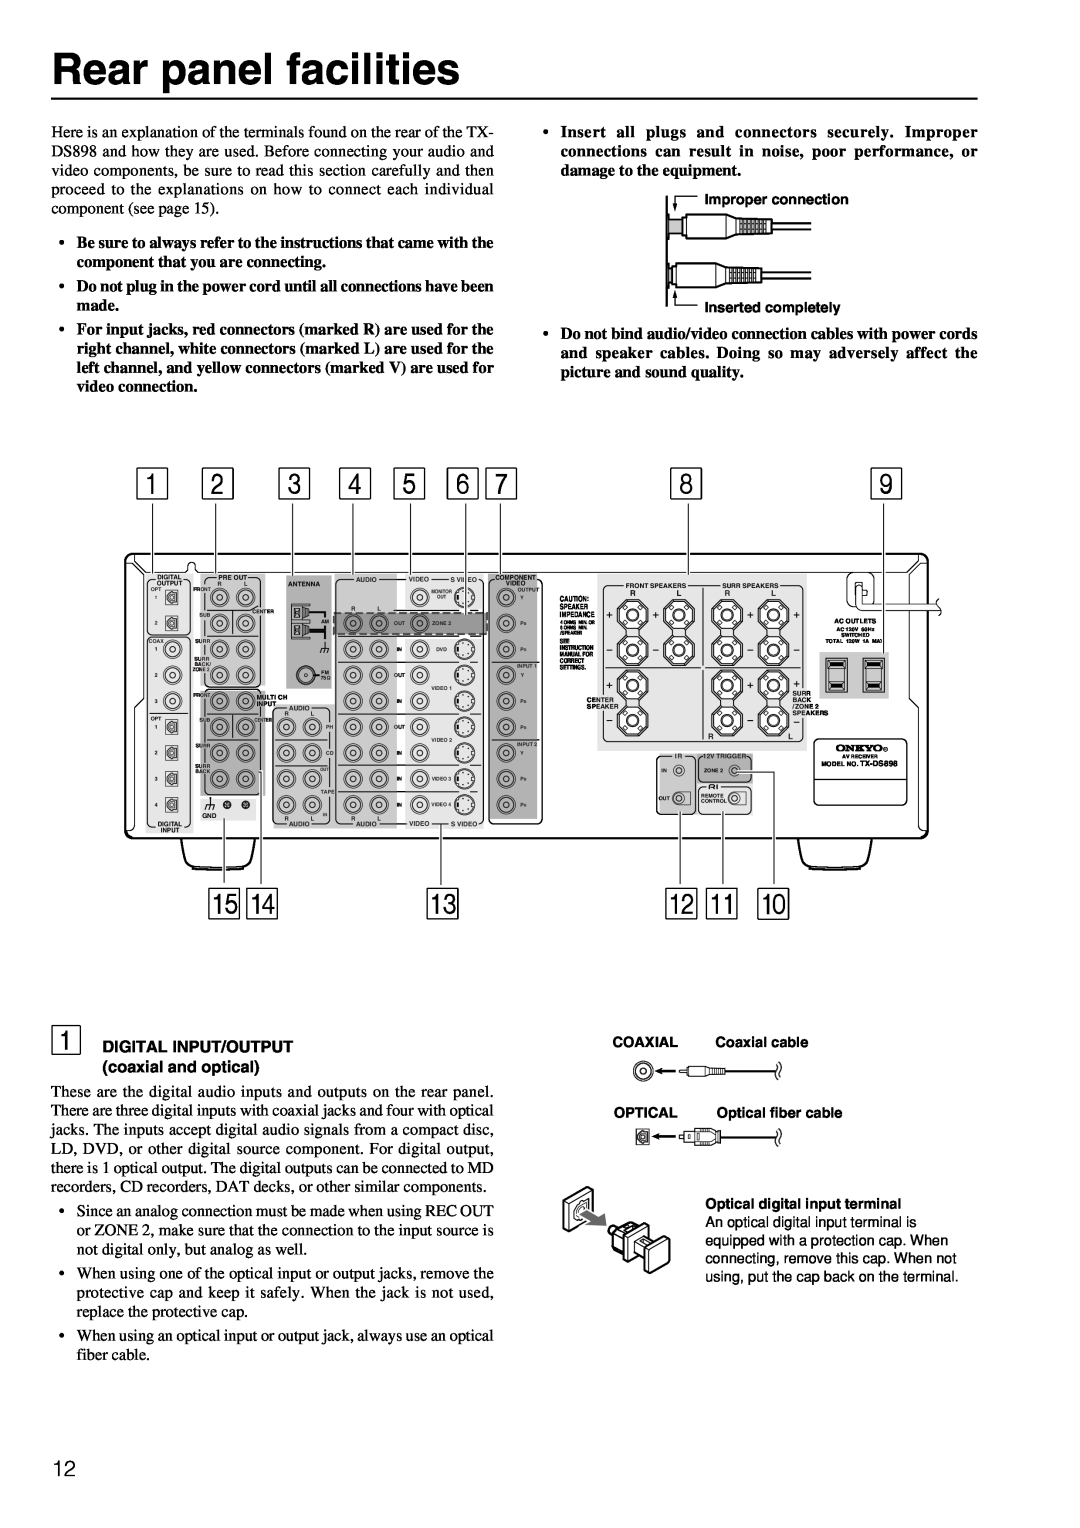 Onkyo TX-DS898 instruction manual Rear panel facilities, DIGITAL INPUT/OUTPUT coaxial and optical 